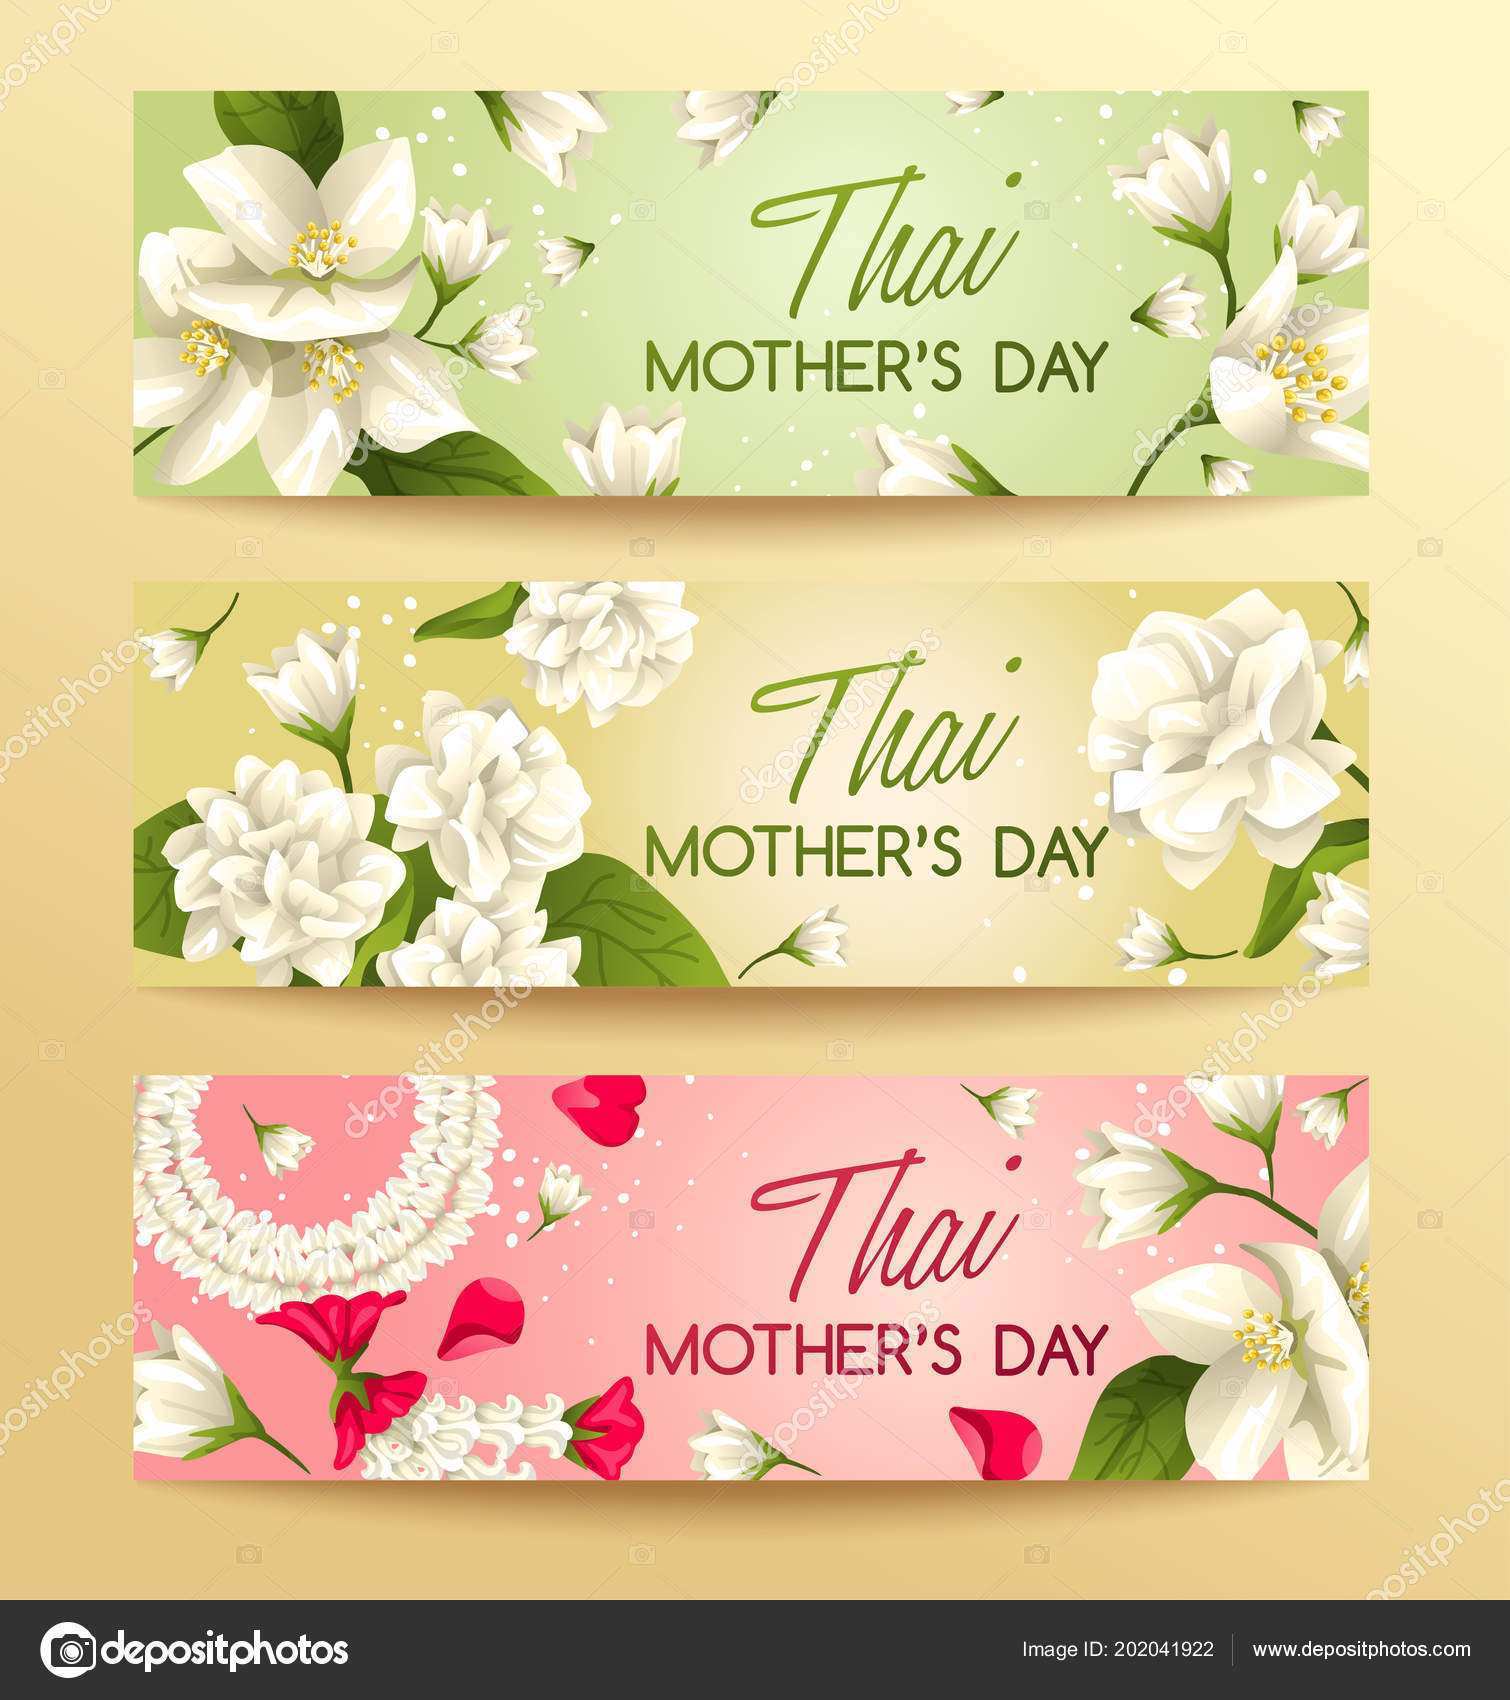 26 How To Create Mothers Card Templates Vector in Photoshop with Mothers Card Templates Vector